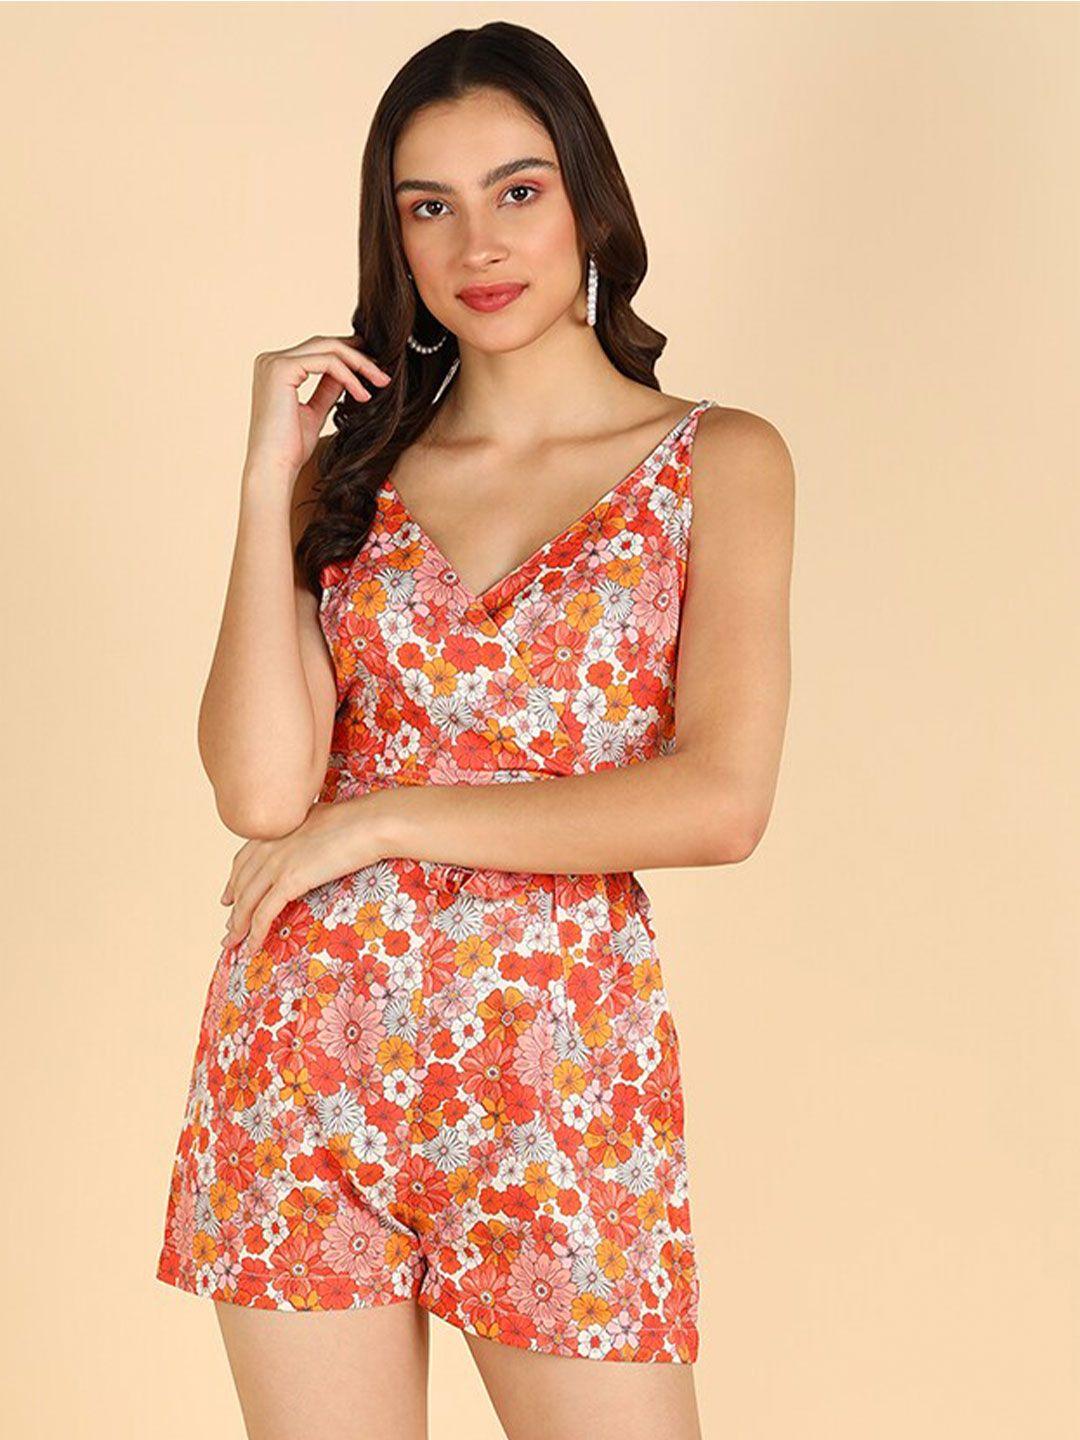 znx clothing floral printed playsuit